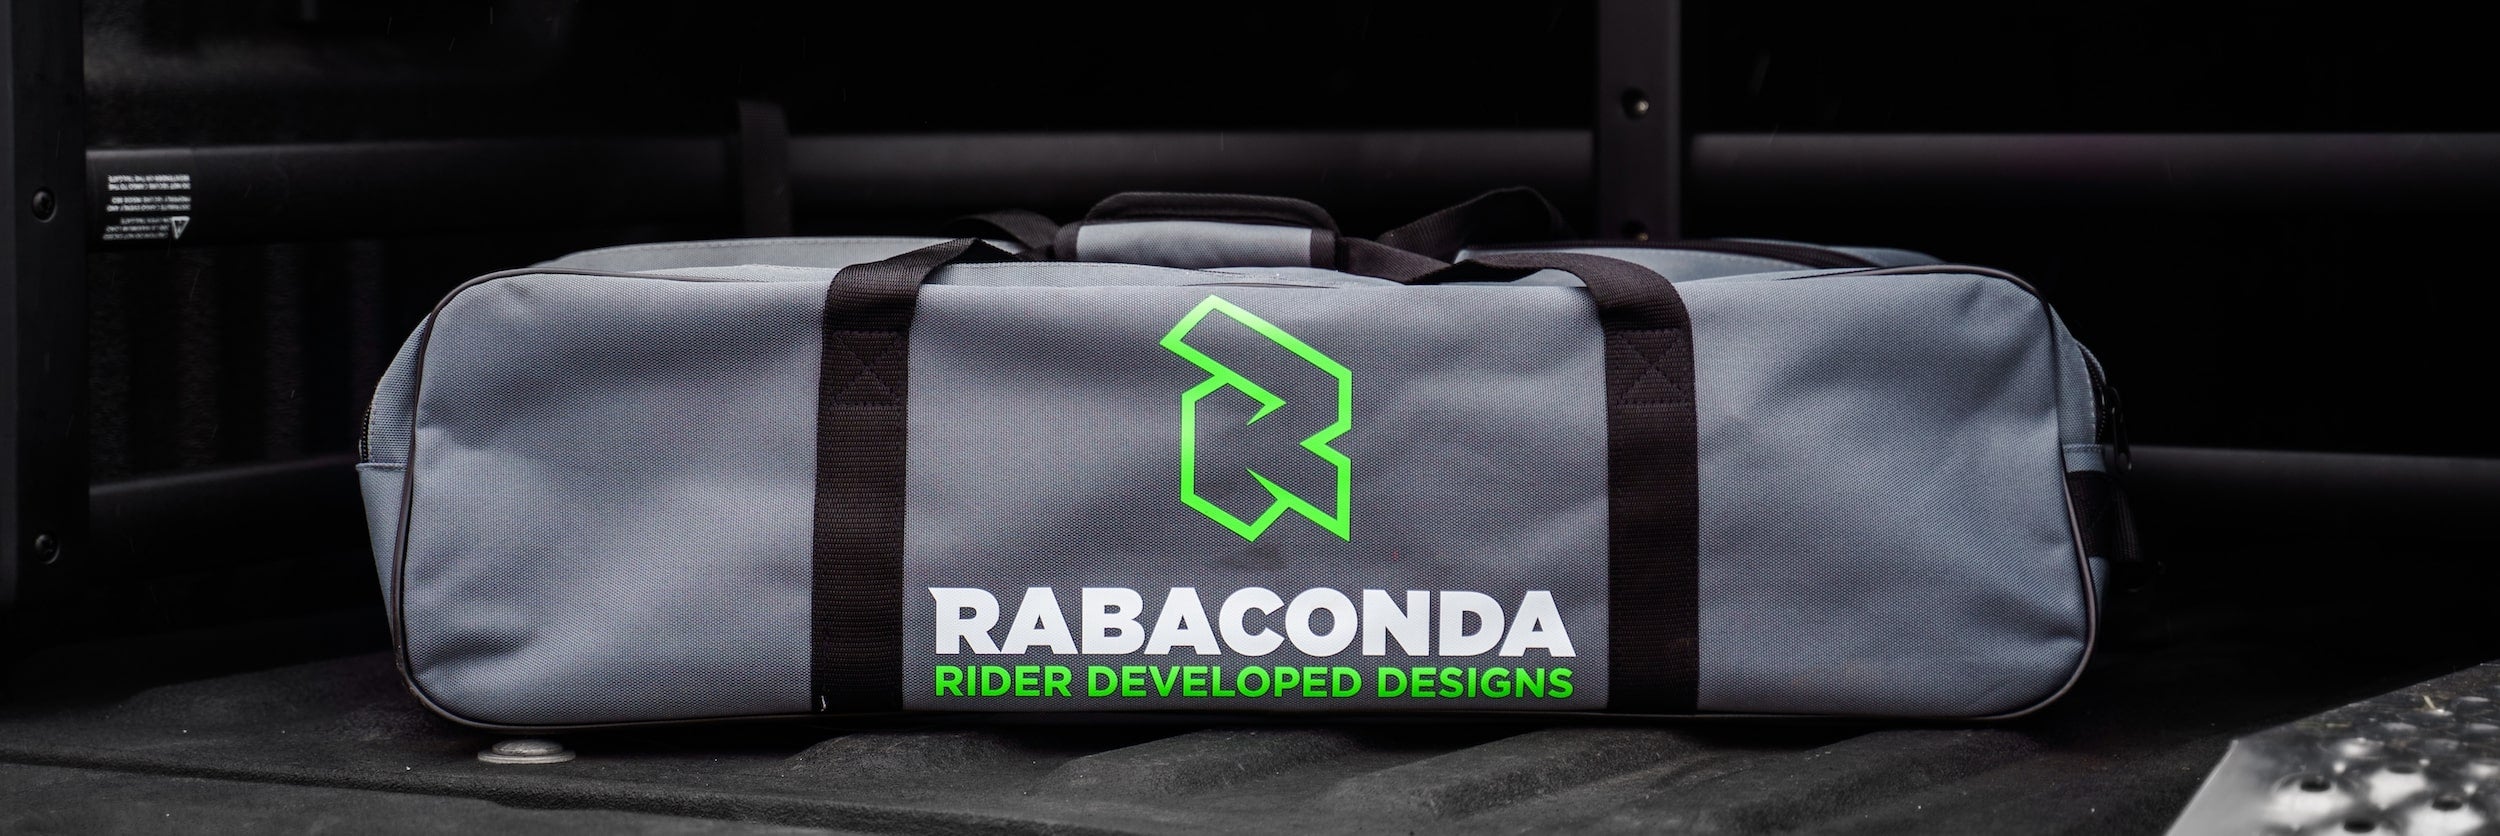 No Matter What You Ride, Rabaconda Has You Covered